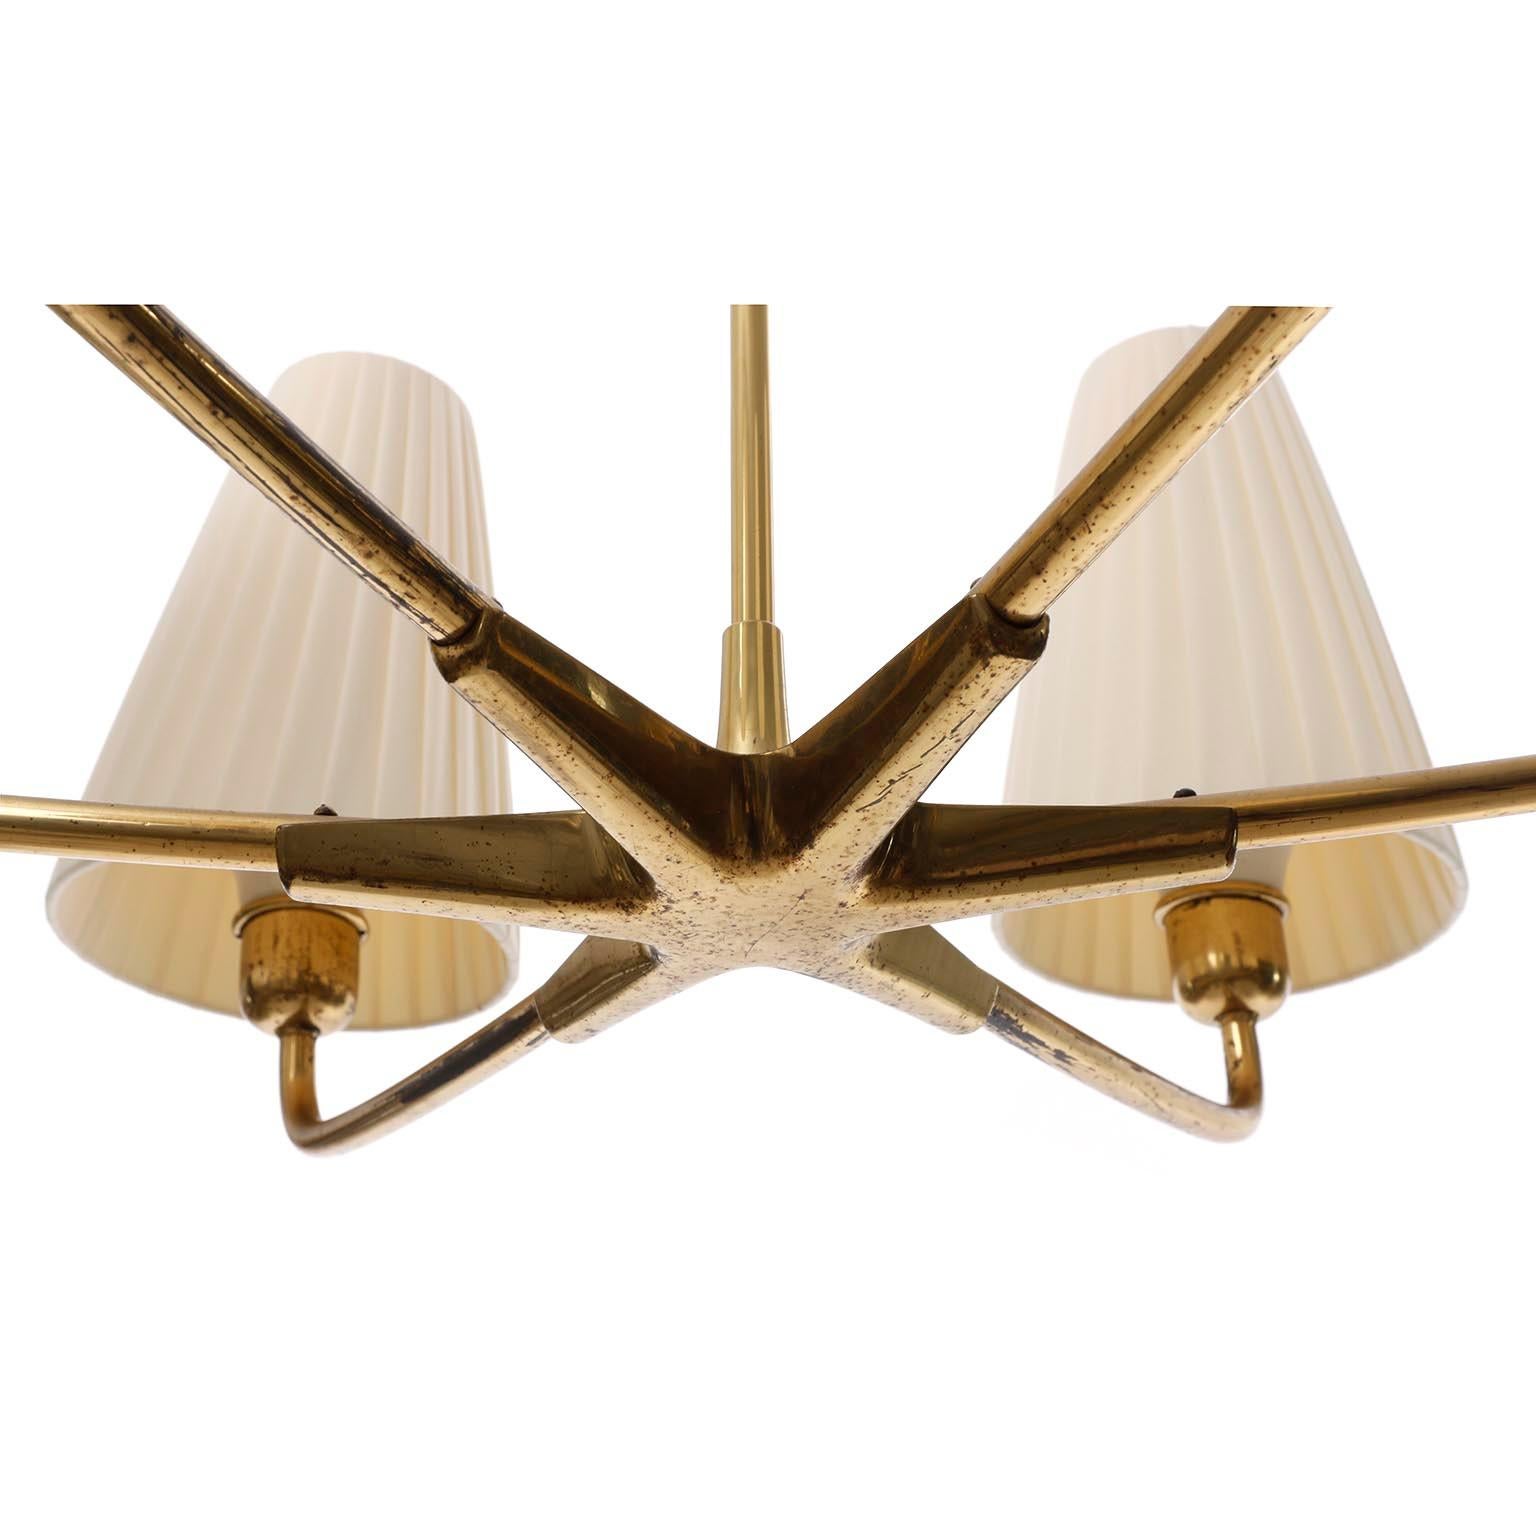 Polished Brass Chandelier Pendant Light, Pleated Cream Fabric Shades, 1930s